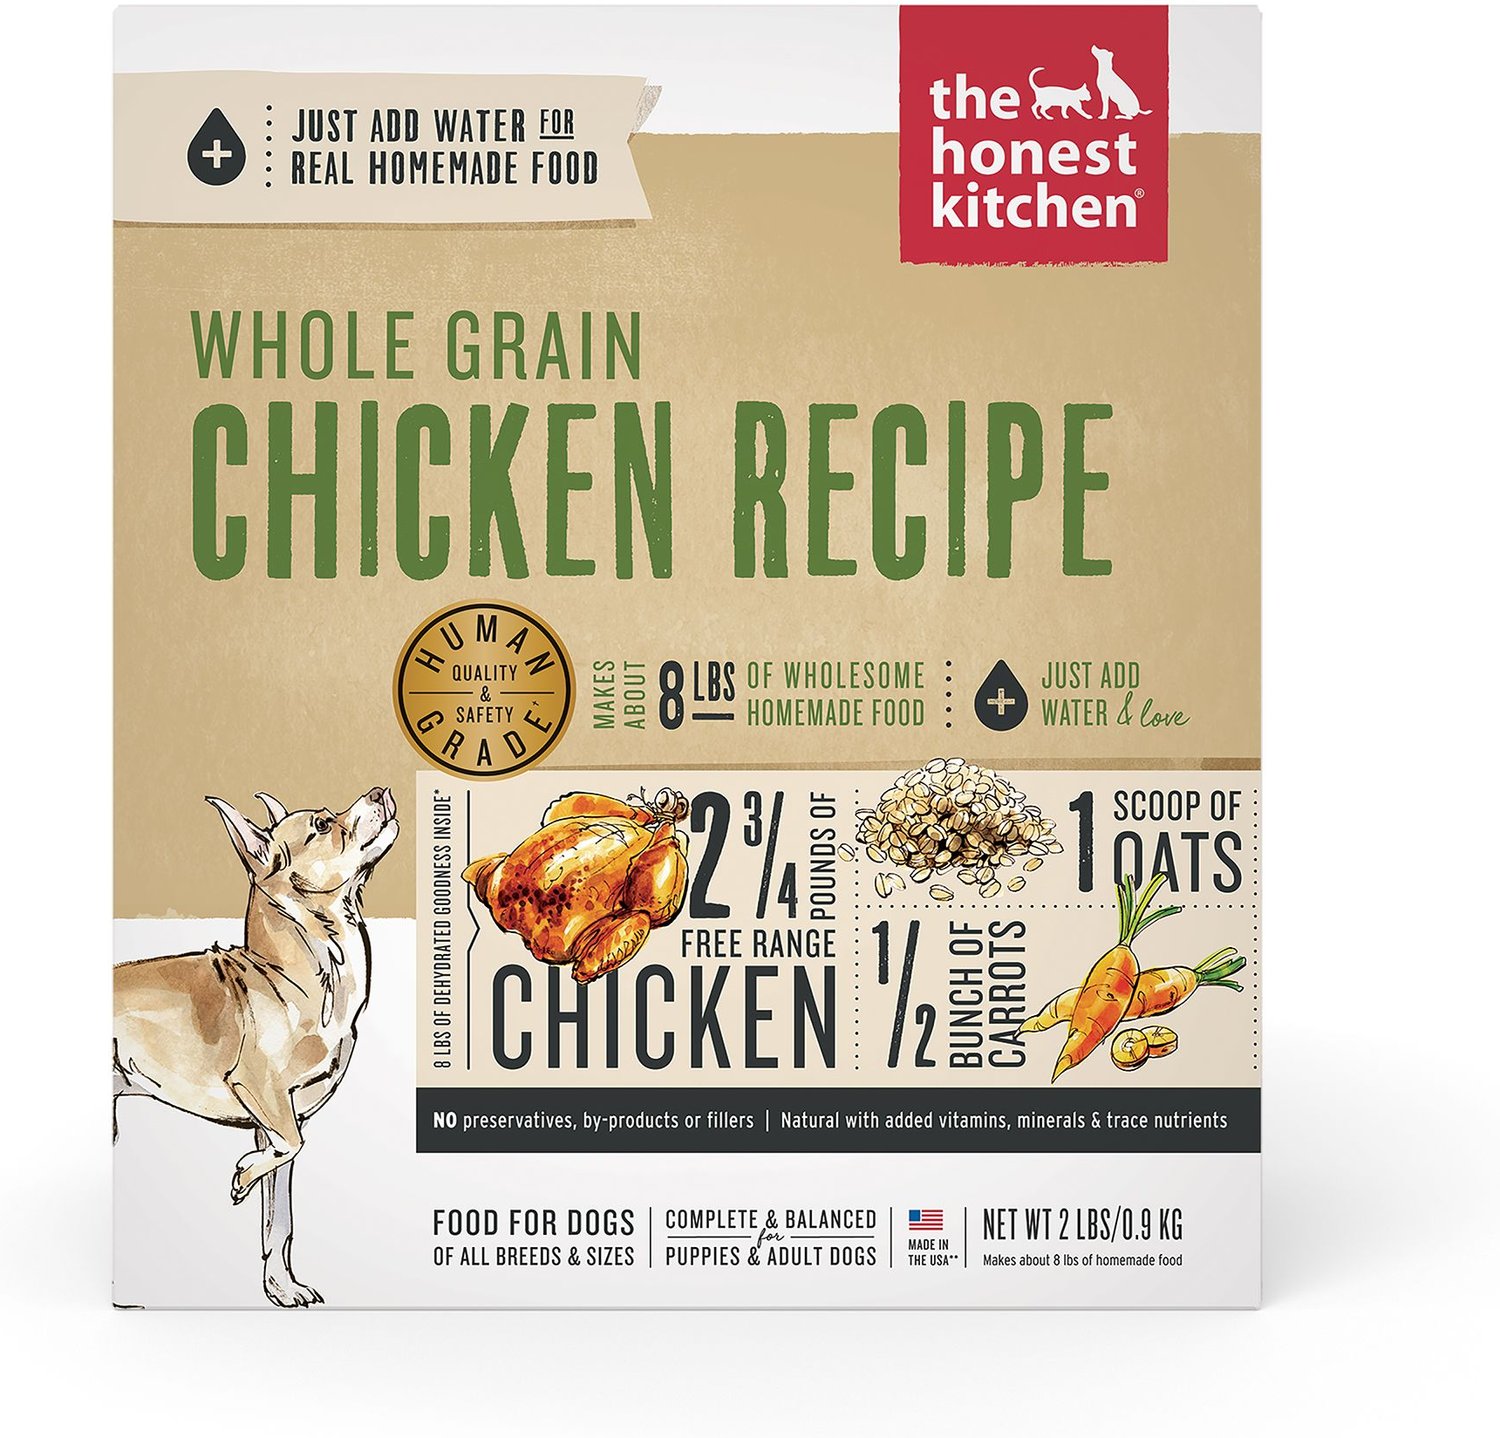 THE HONEST KITCHEN Whole Grain Chicken Recipe Dehydrated Dog Food, 2lb